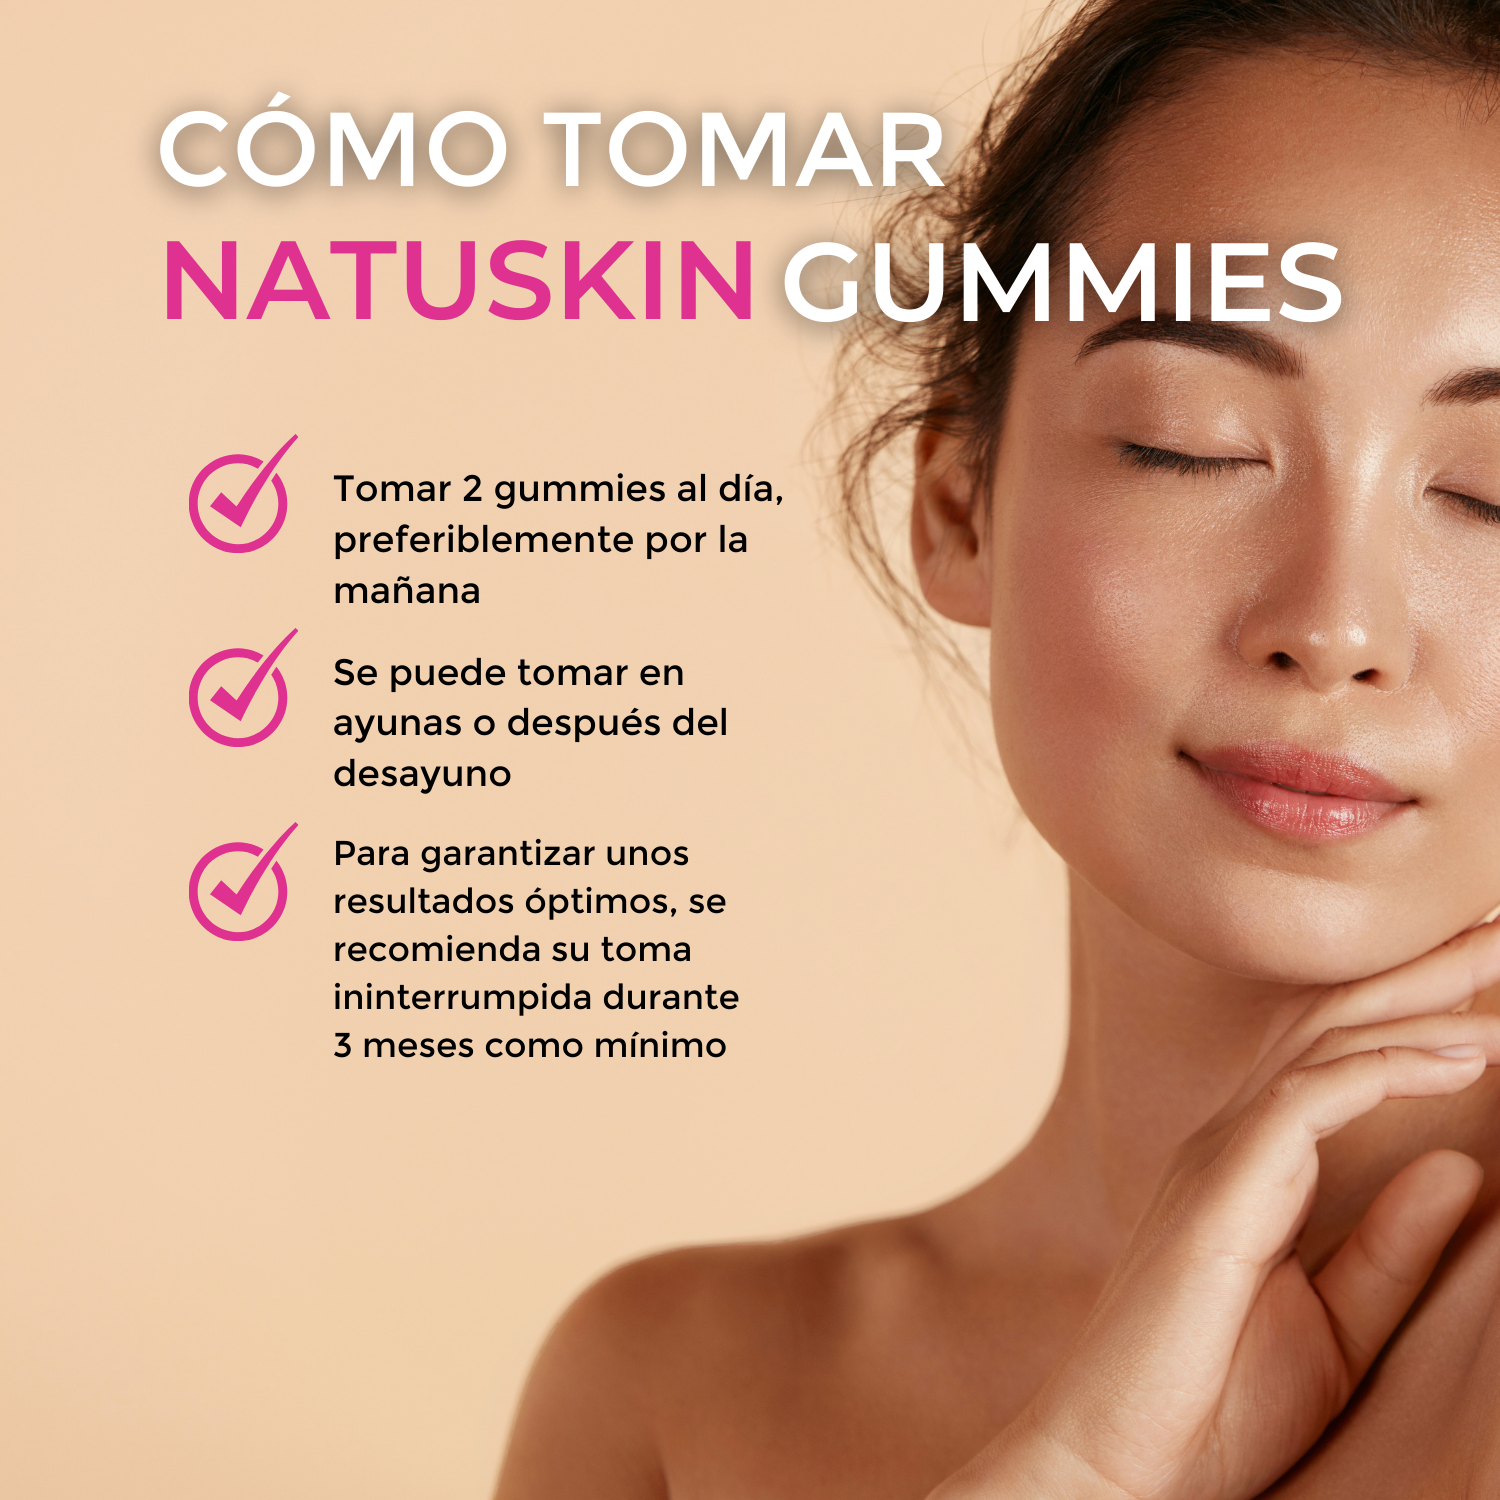 NatuSkin Gummies – With Collagen for sublime skin- 1 month